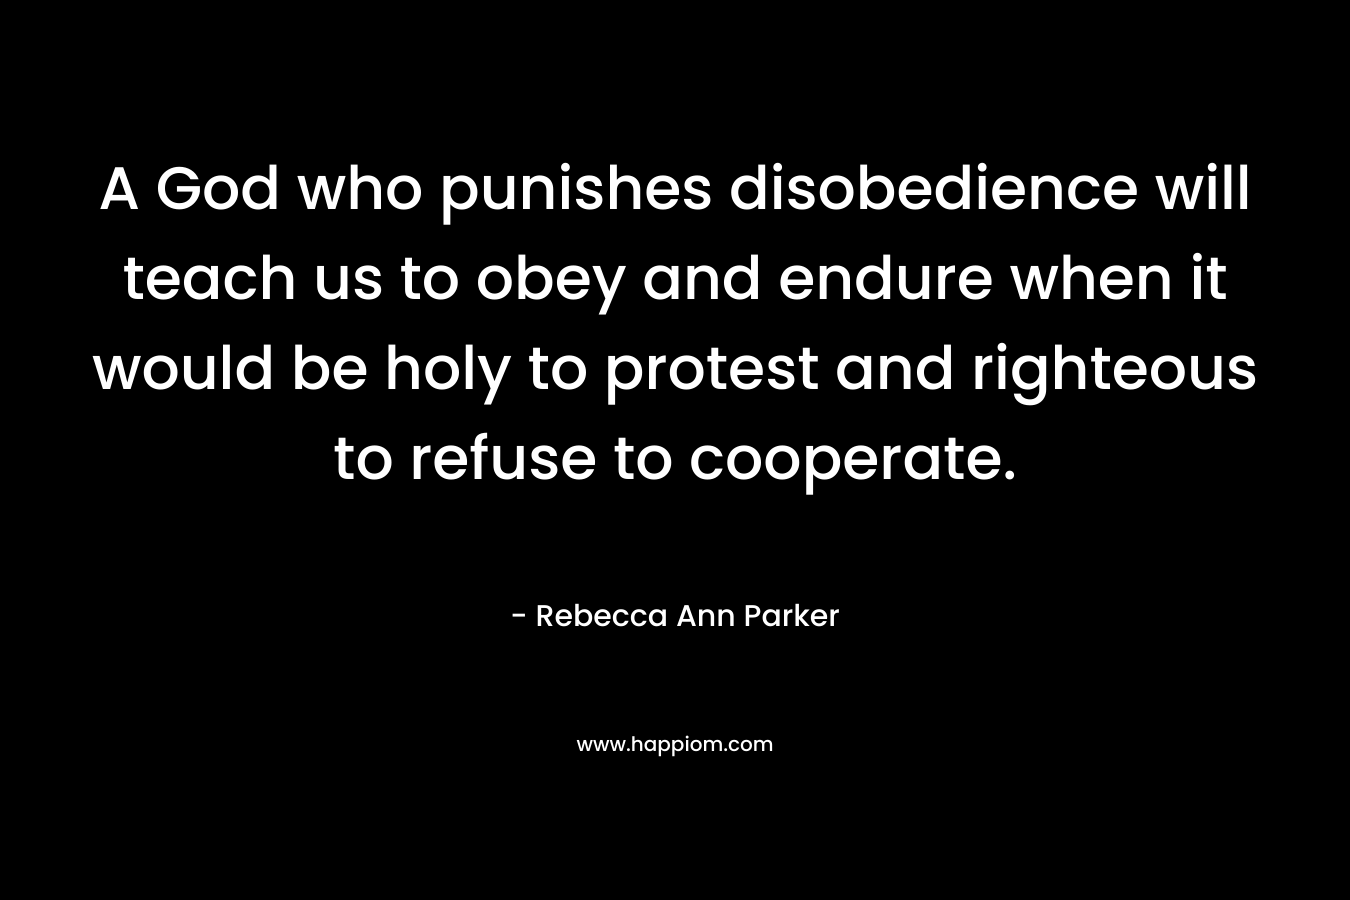 A God who punishes disobedience will teach us to obey and endure when it would be holy to protest and righteous to refuse to cooperate. – Rebecca Ann Parker